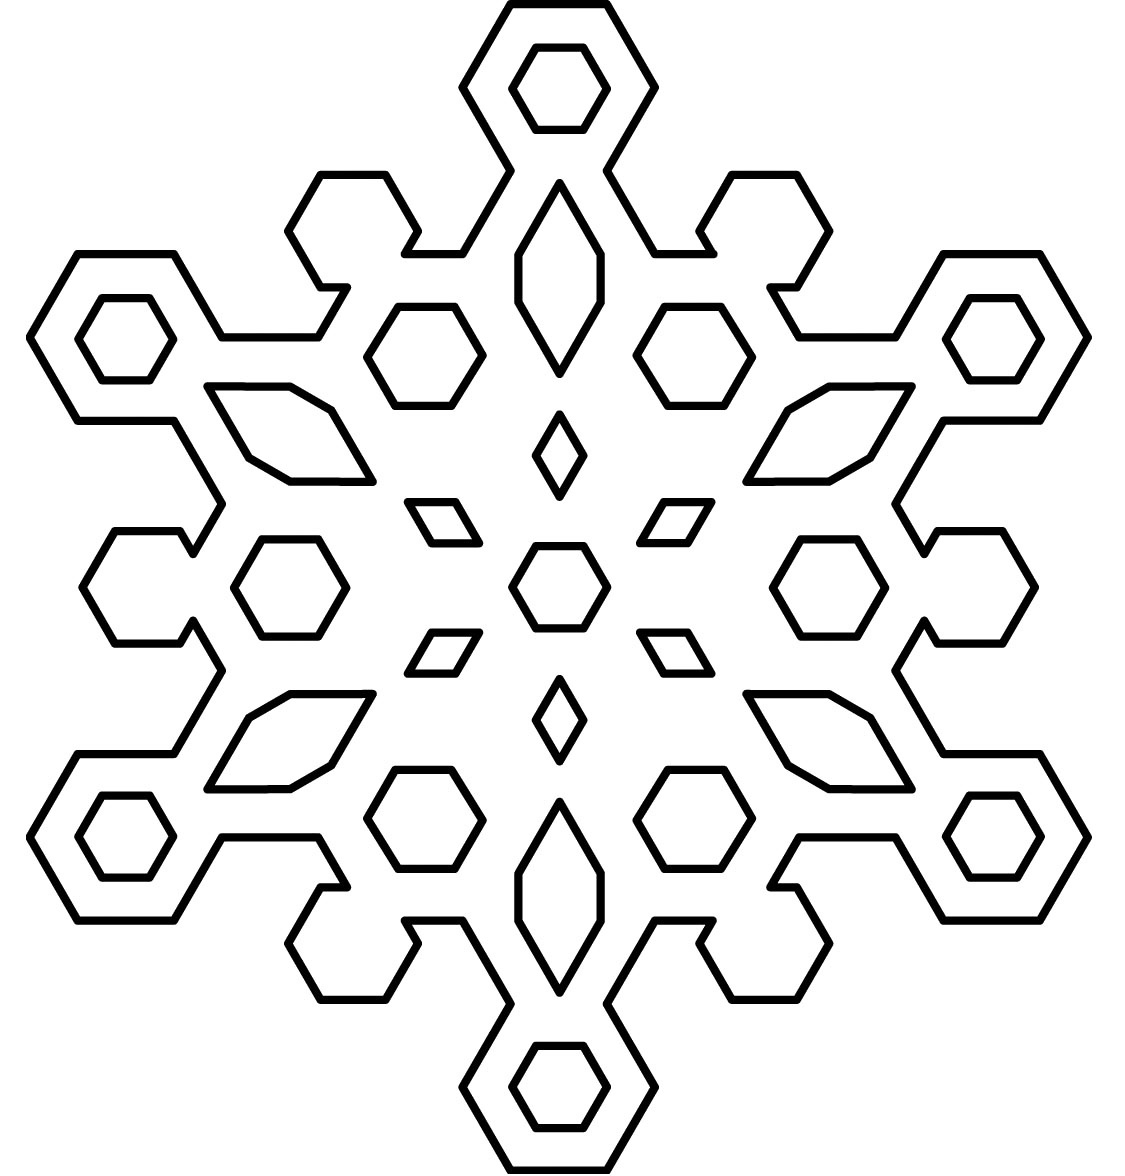 Free Printable Snowflake Coloring Pages For Kids - Free Printable Snowflakes